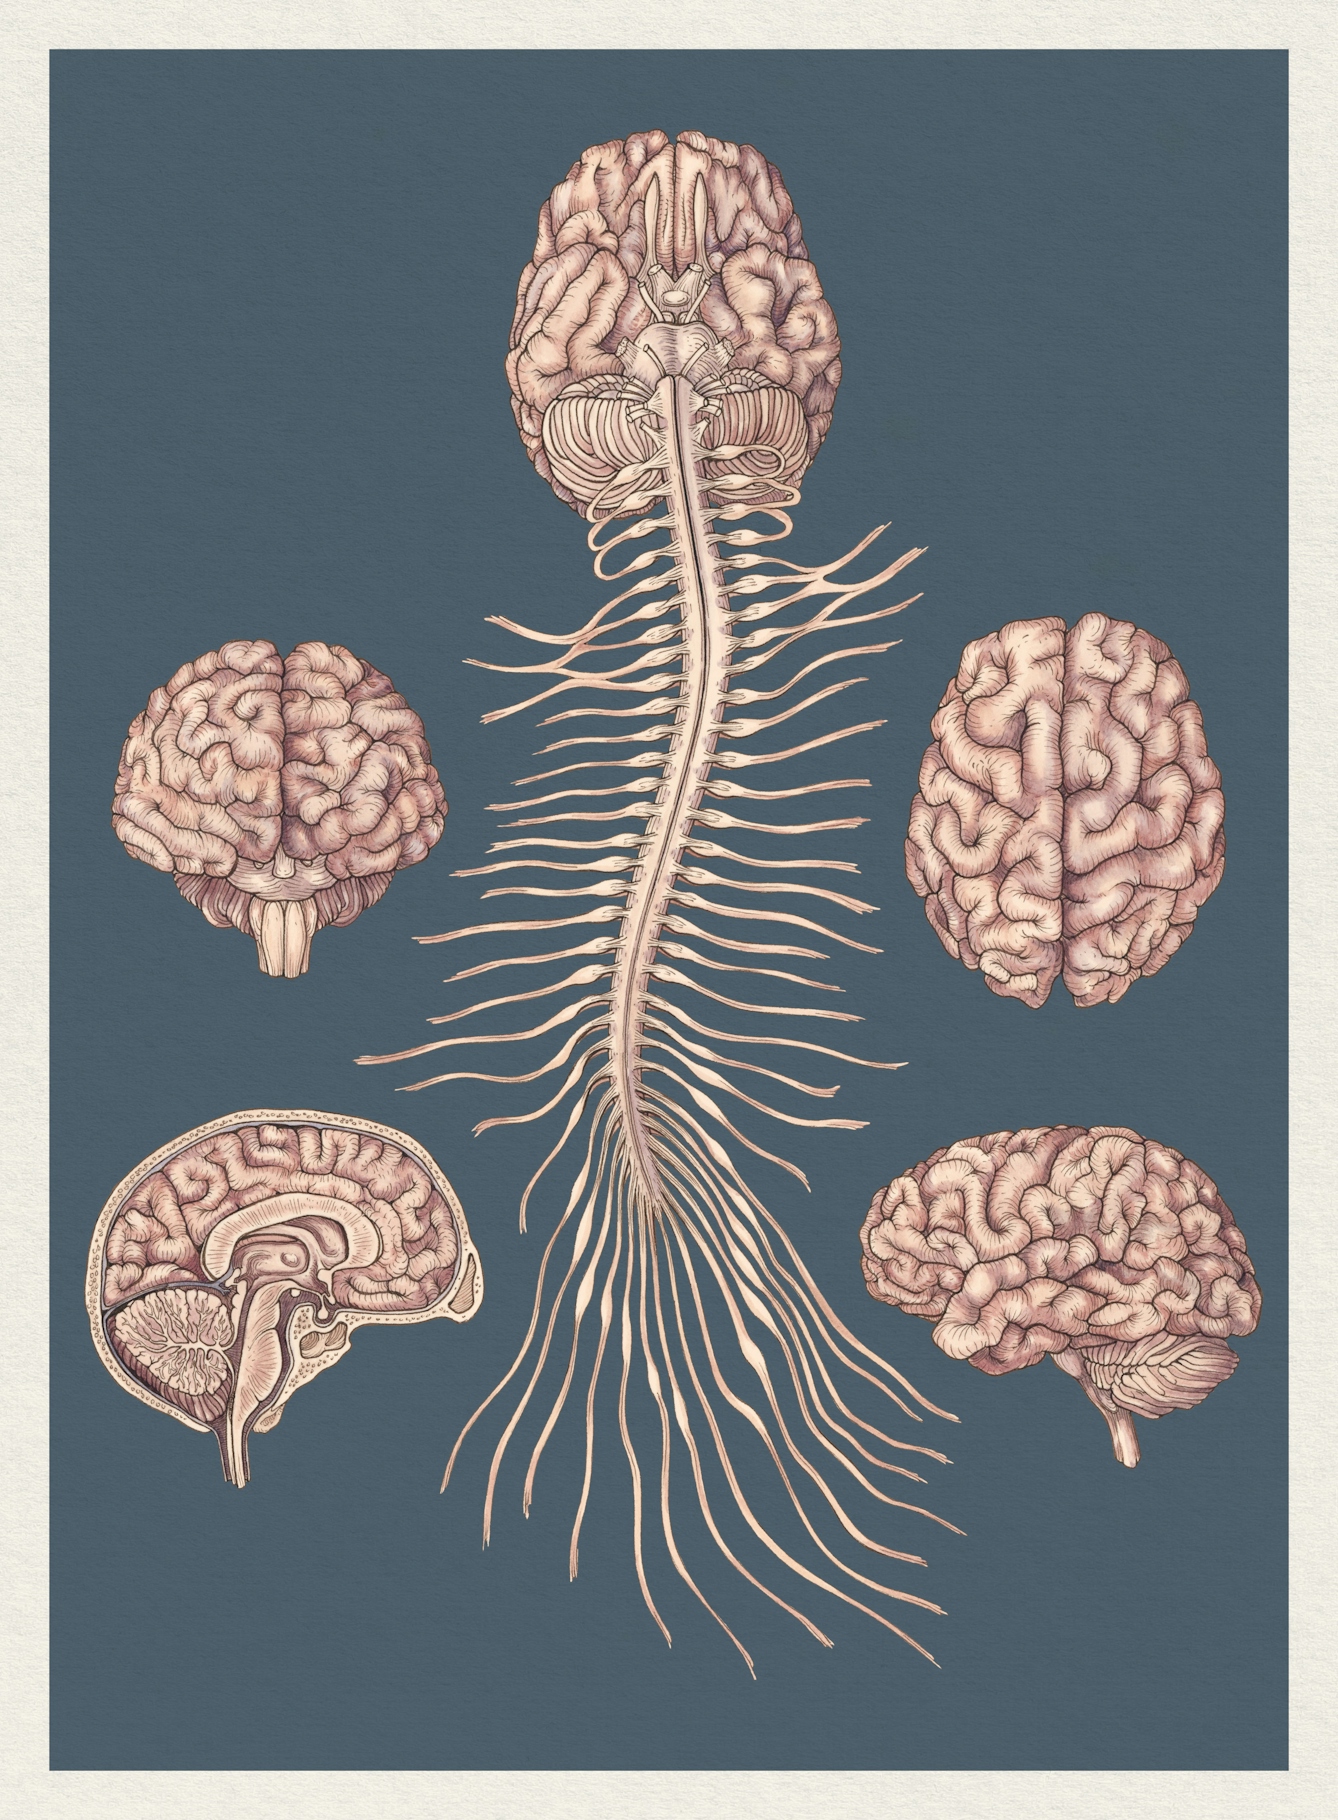 Illustration showing the human central nervous system, including several views of the brain